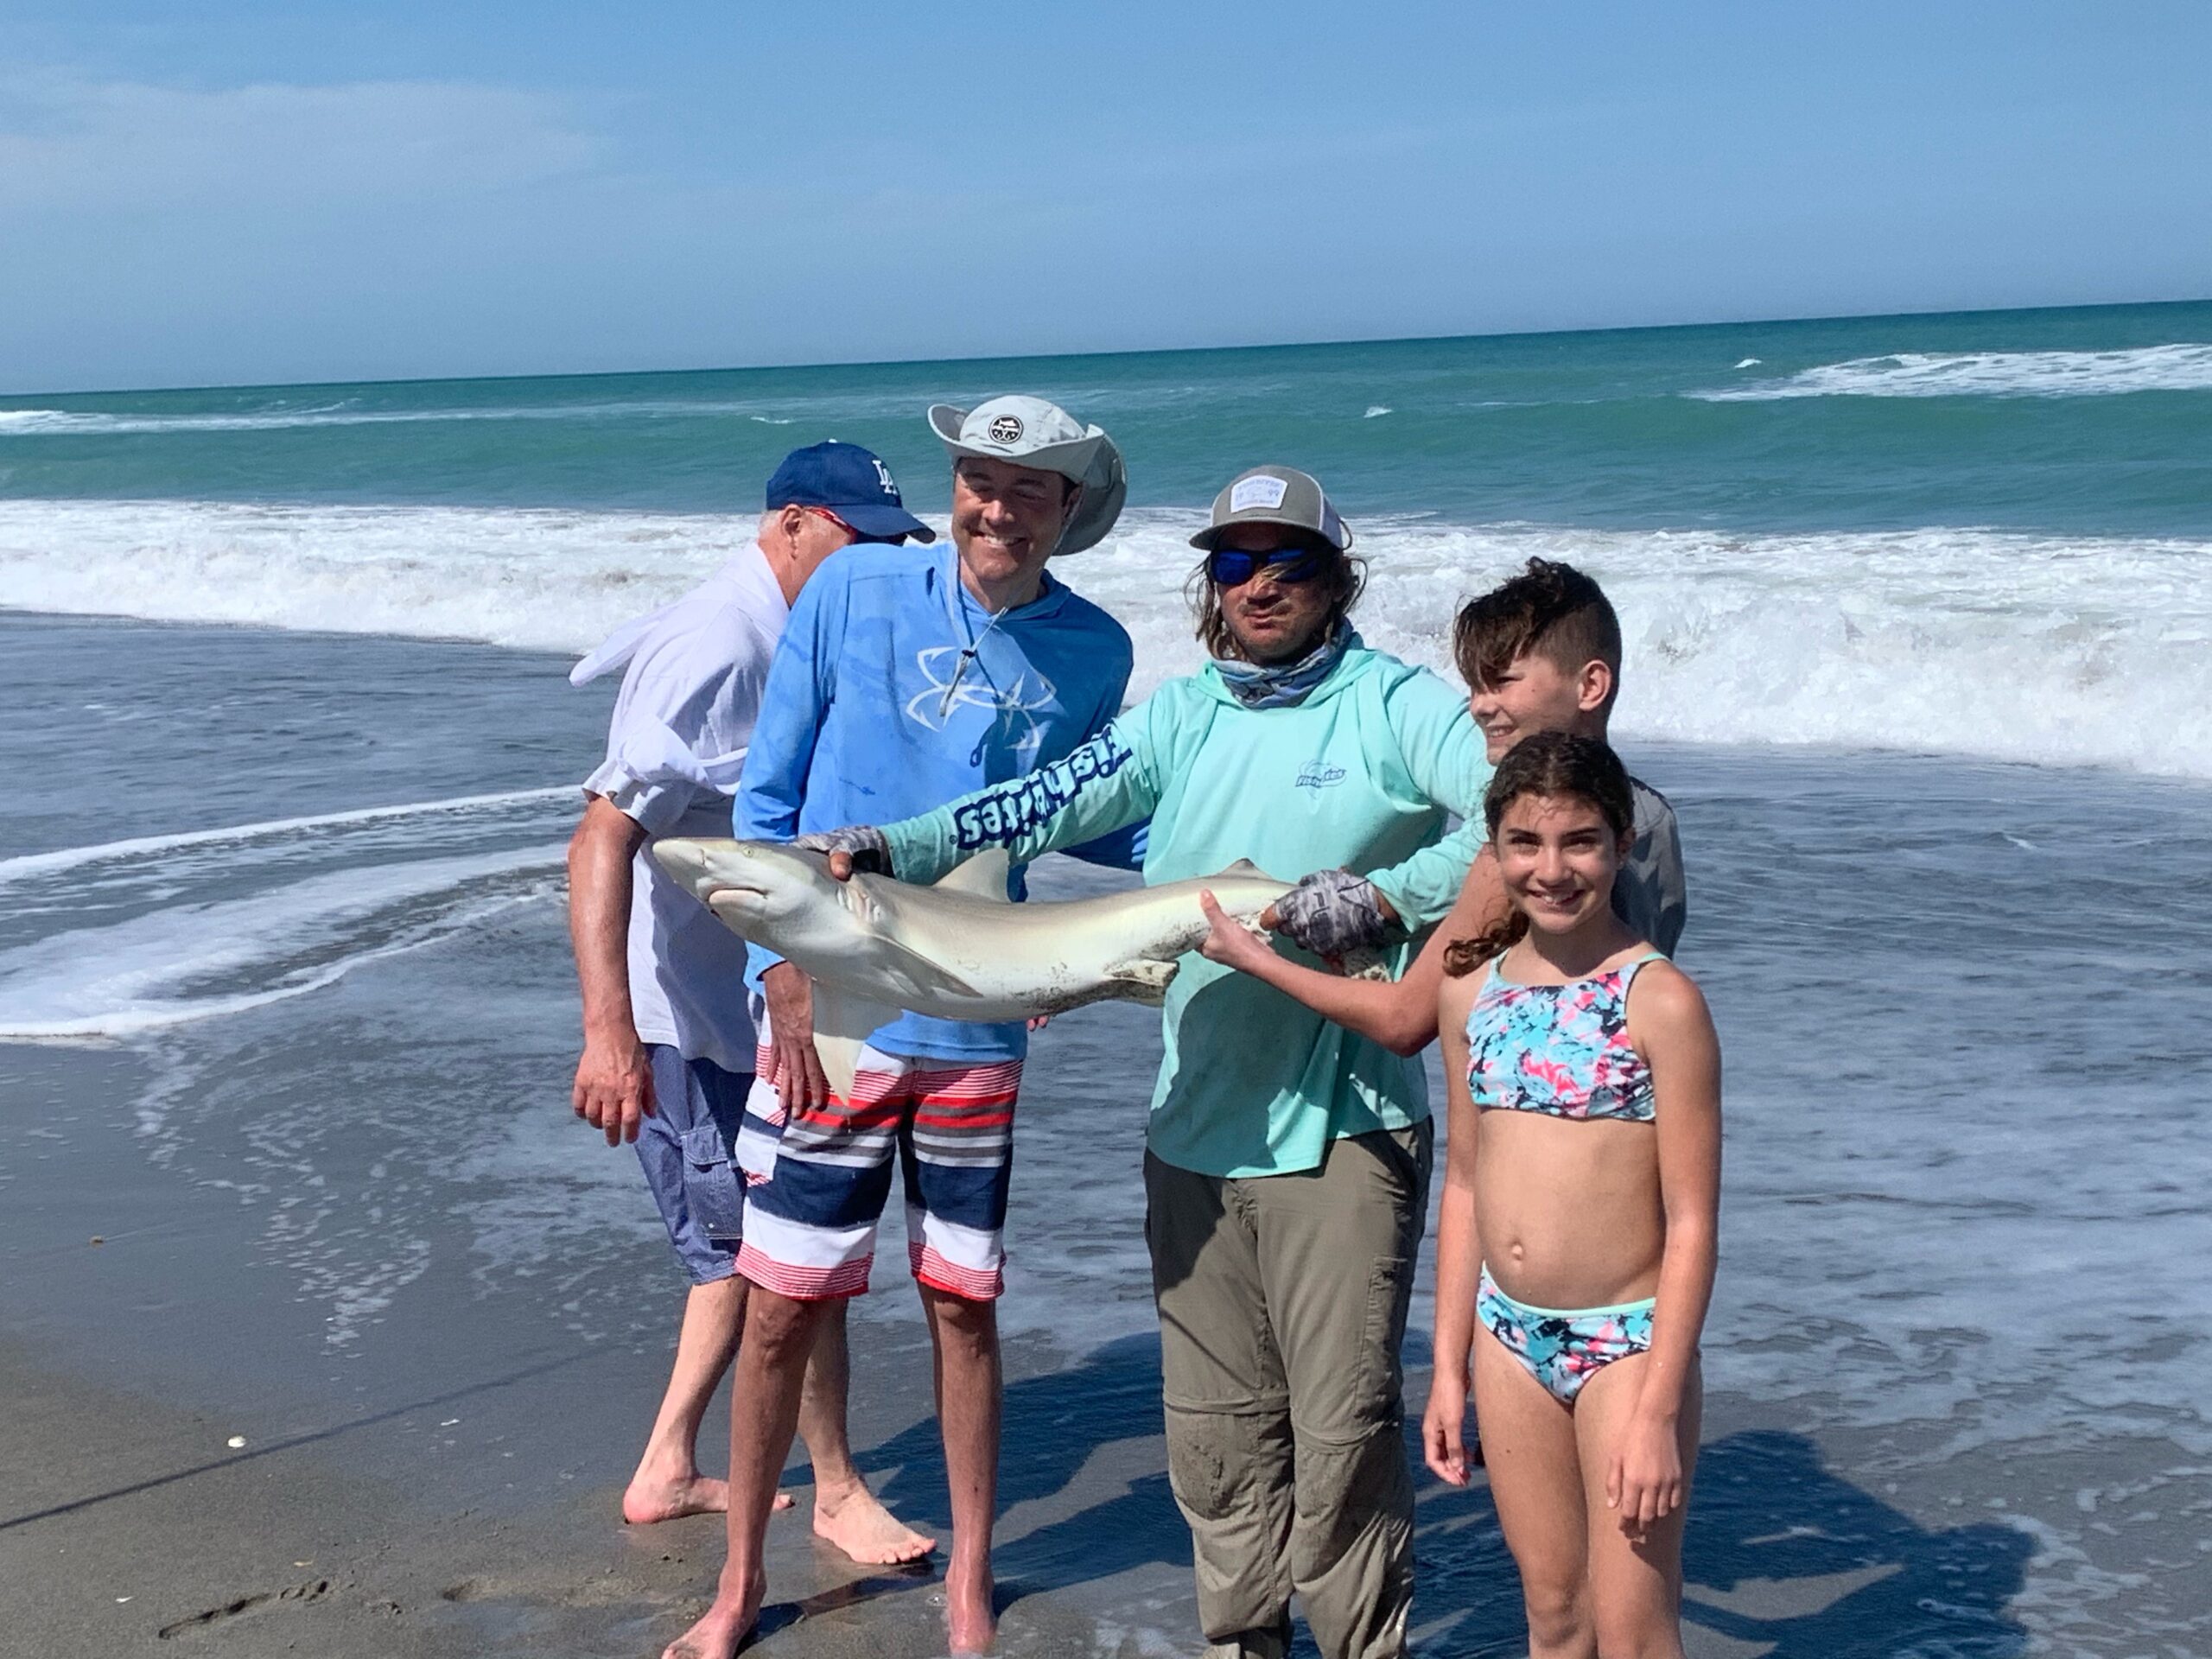 Surf Fishing Continues to Excite Beachgoers